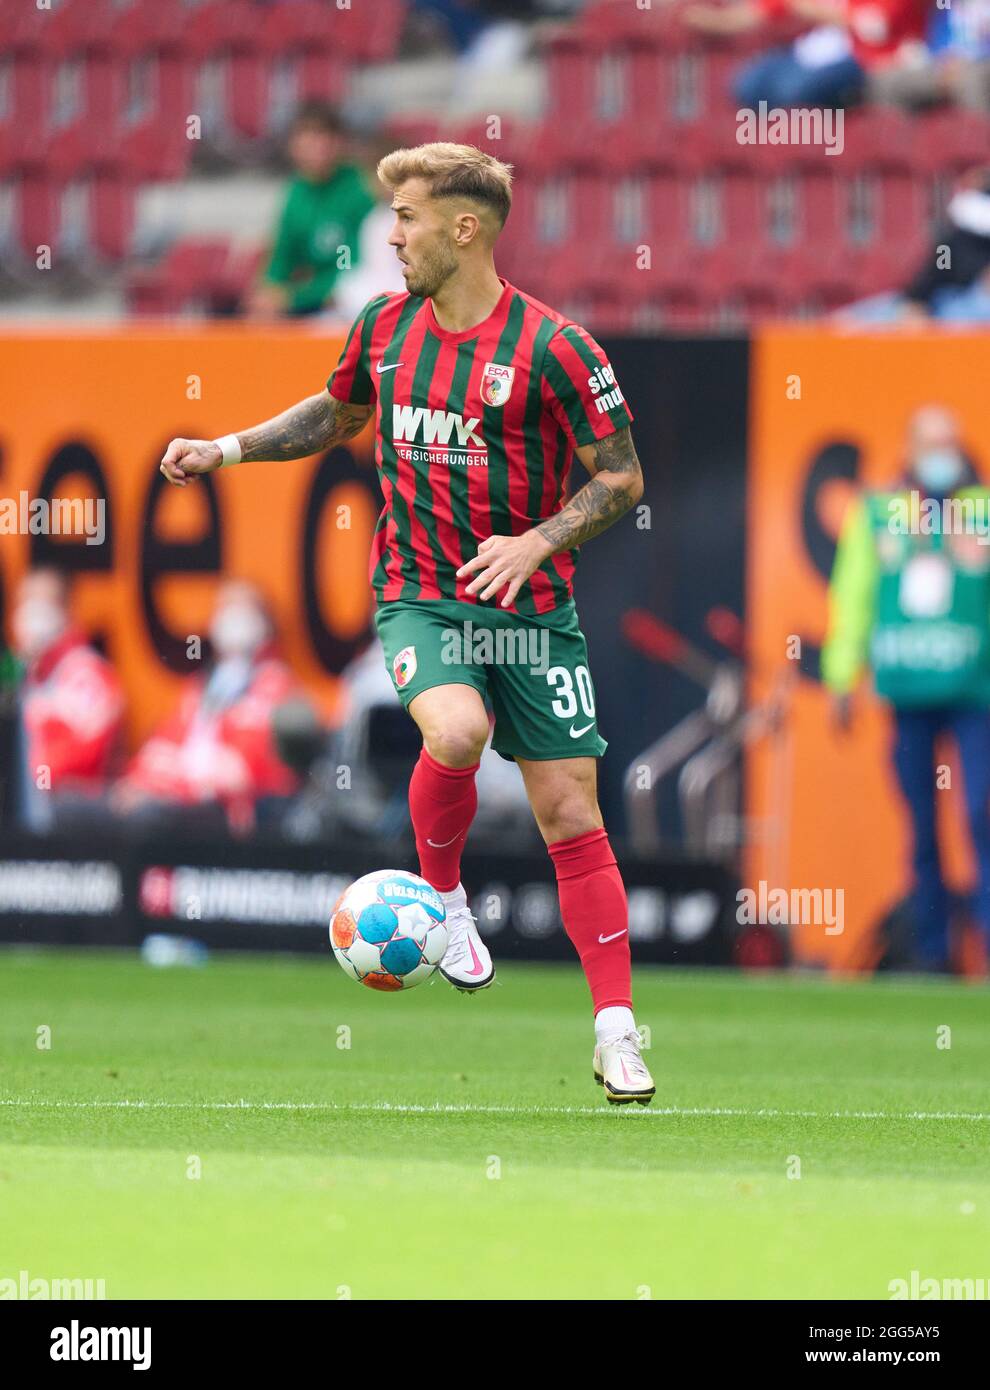 Niklas Dorsch, FCA 30  in the match FC AUGSBURG - BAYER 04 LEVERKUSEN 1-4 1.German Football League on August 28, 2021 in Augsburg, Germany  Season 2021/2022, matchday 3, 1.Bundesliga, 3.Spieltag. © Peter Schatz / Alamy Live News    - DFL REGULATIONS PROHIBIT ANY USE OF PHOTOGRAPHS as IMAGE SEQUENCES and/or QUASI-VIDEO - Stock Photo